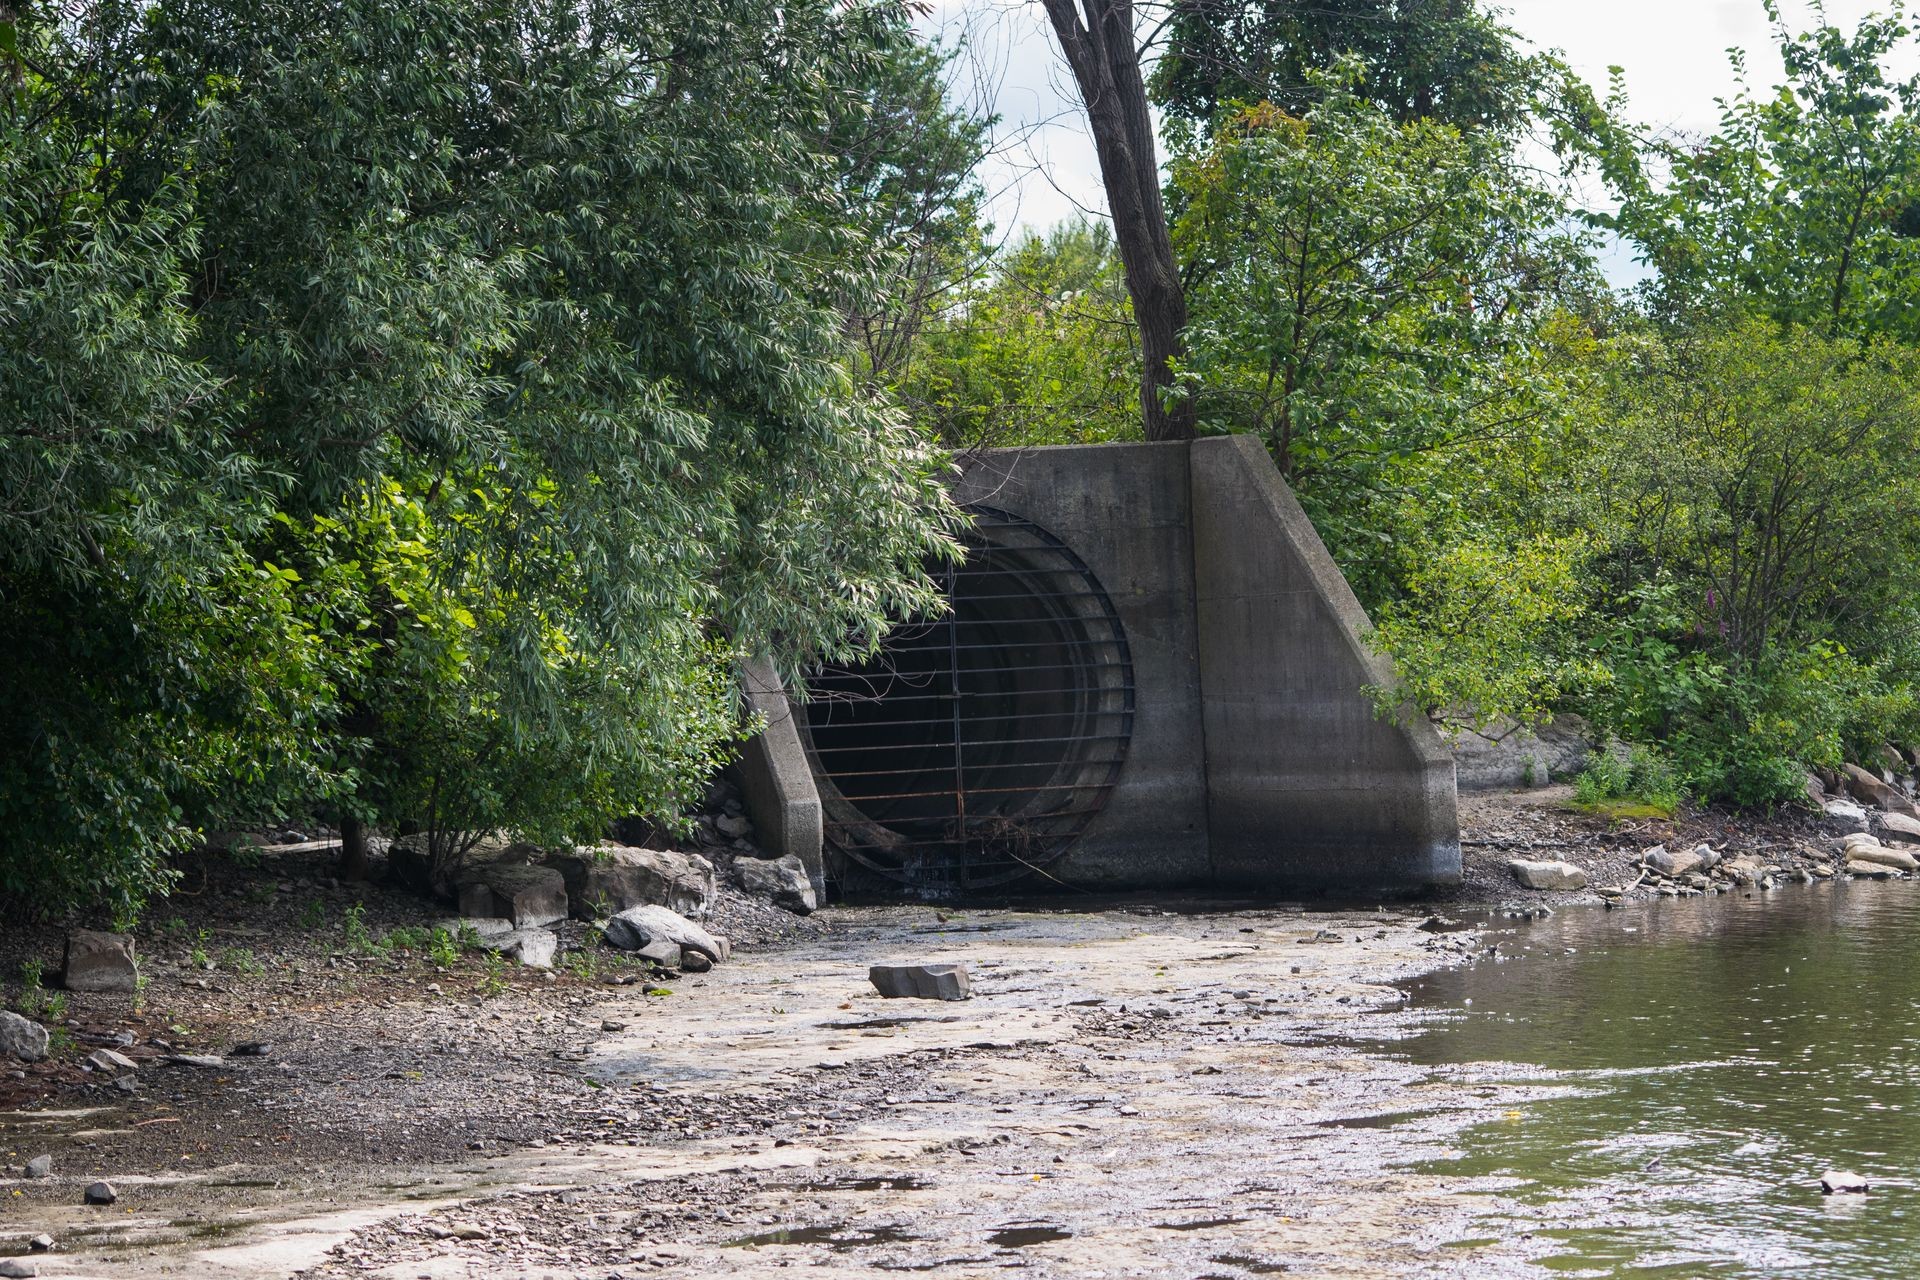 Sewage drain emptying into the Ottawa River, covered by a grate